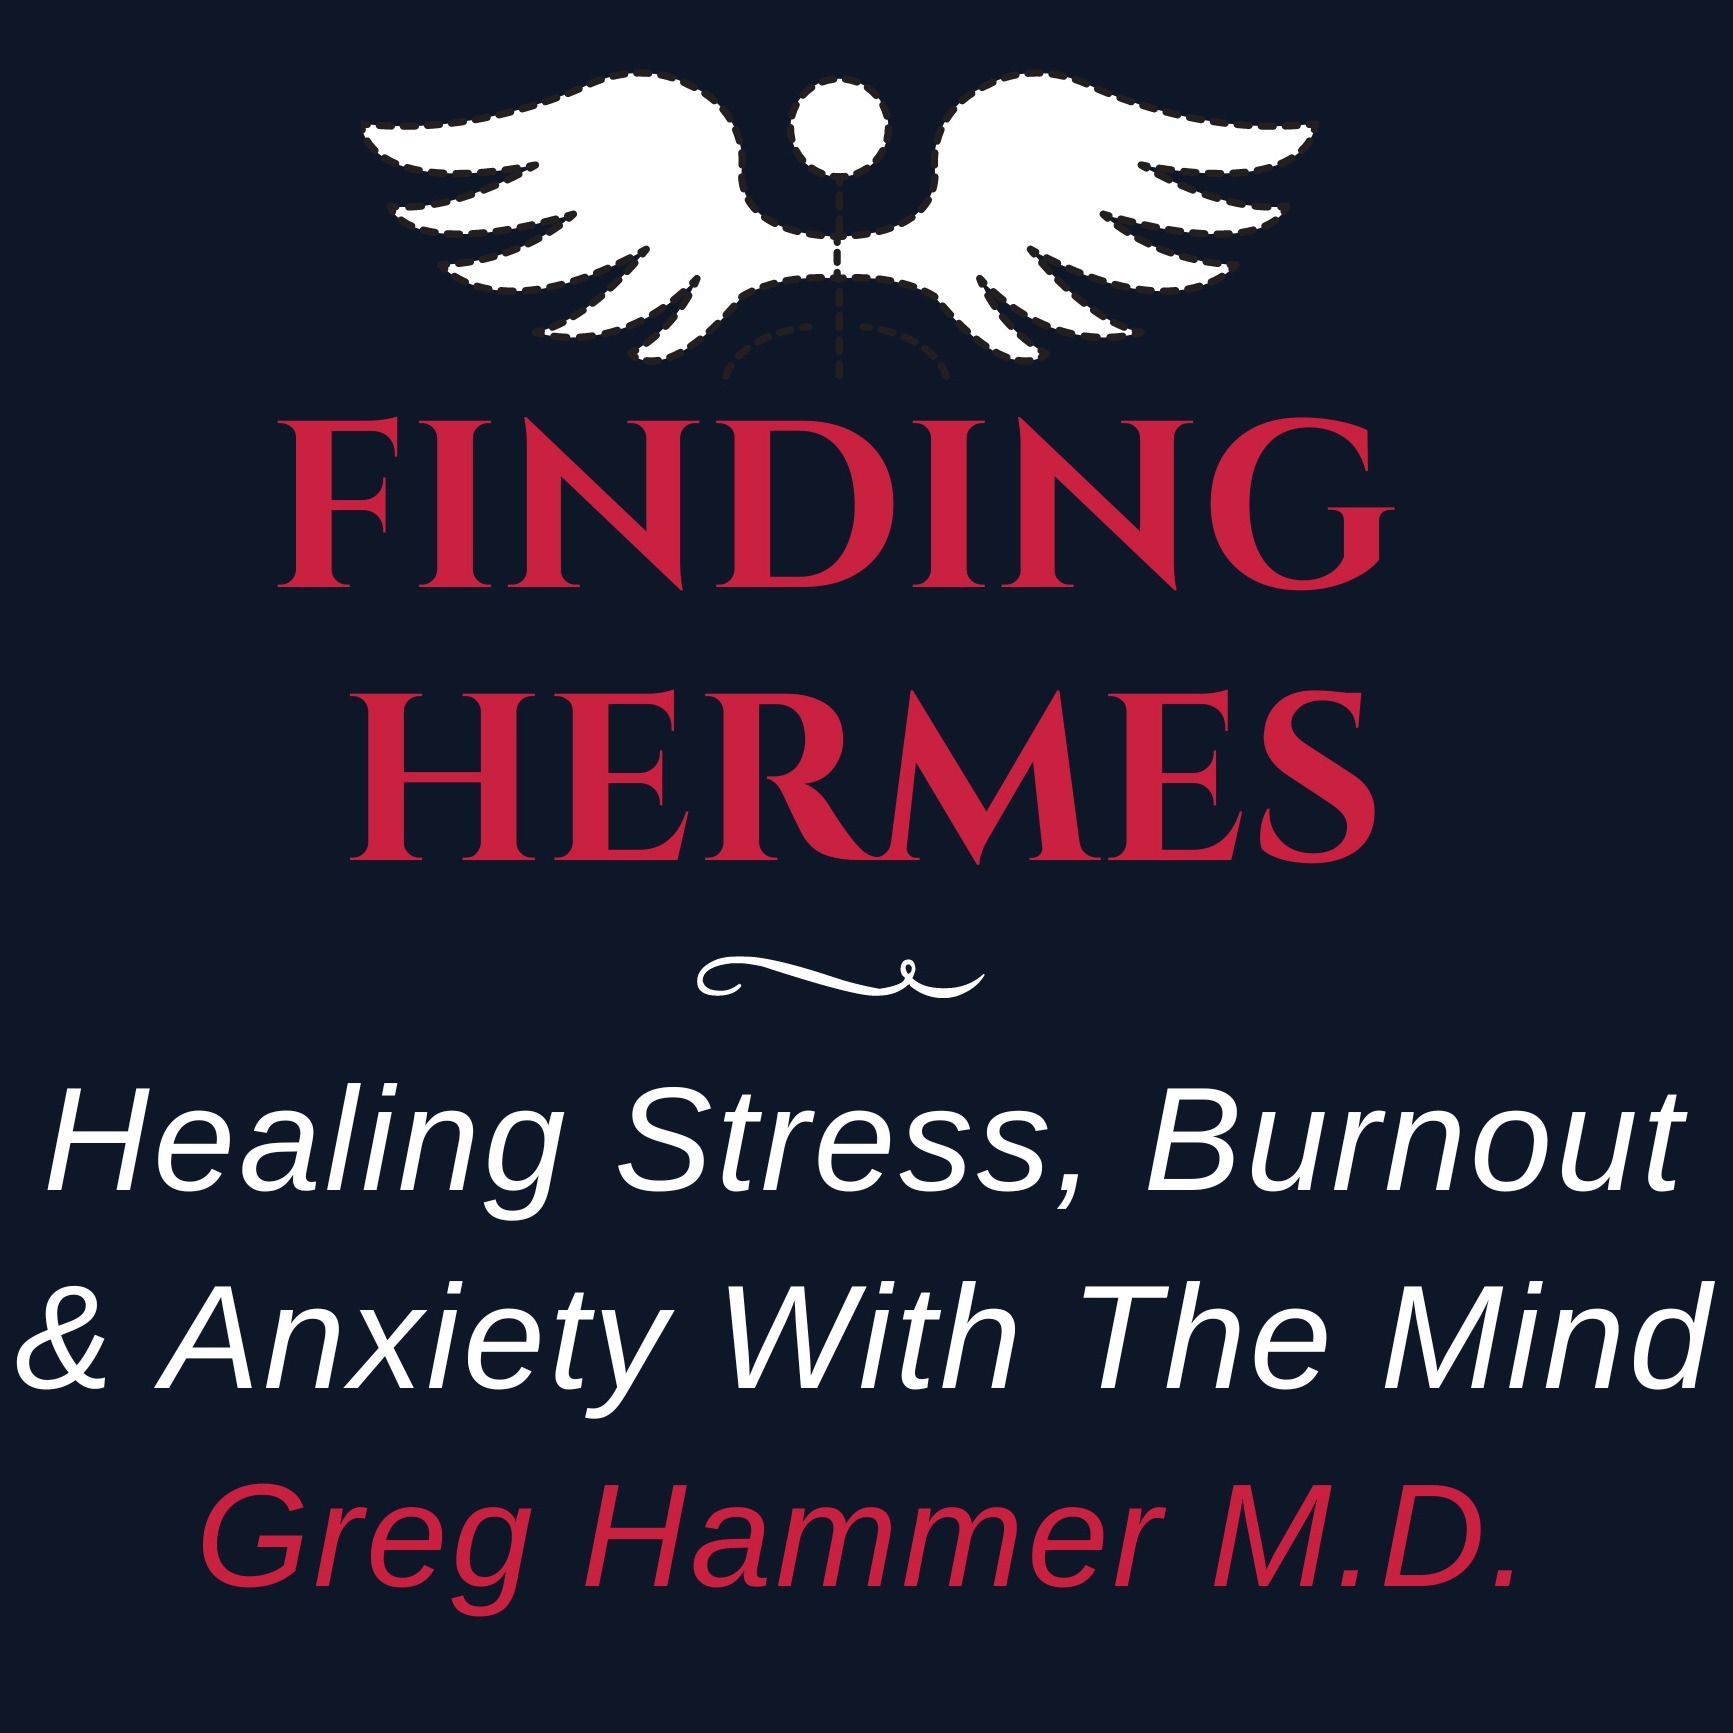 Dr. Greg Hammer on Healing Stress, Burnout & Anxiety With The Mind